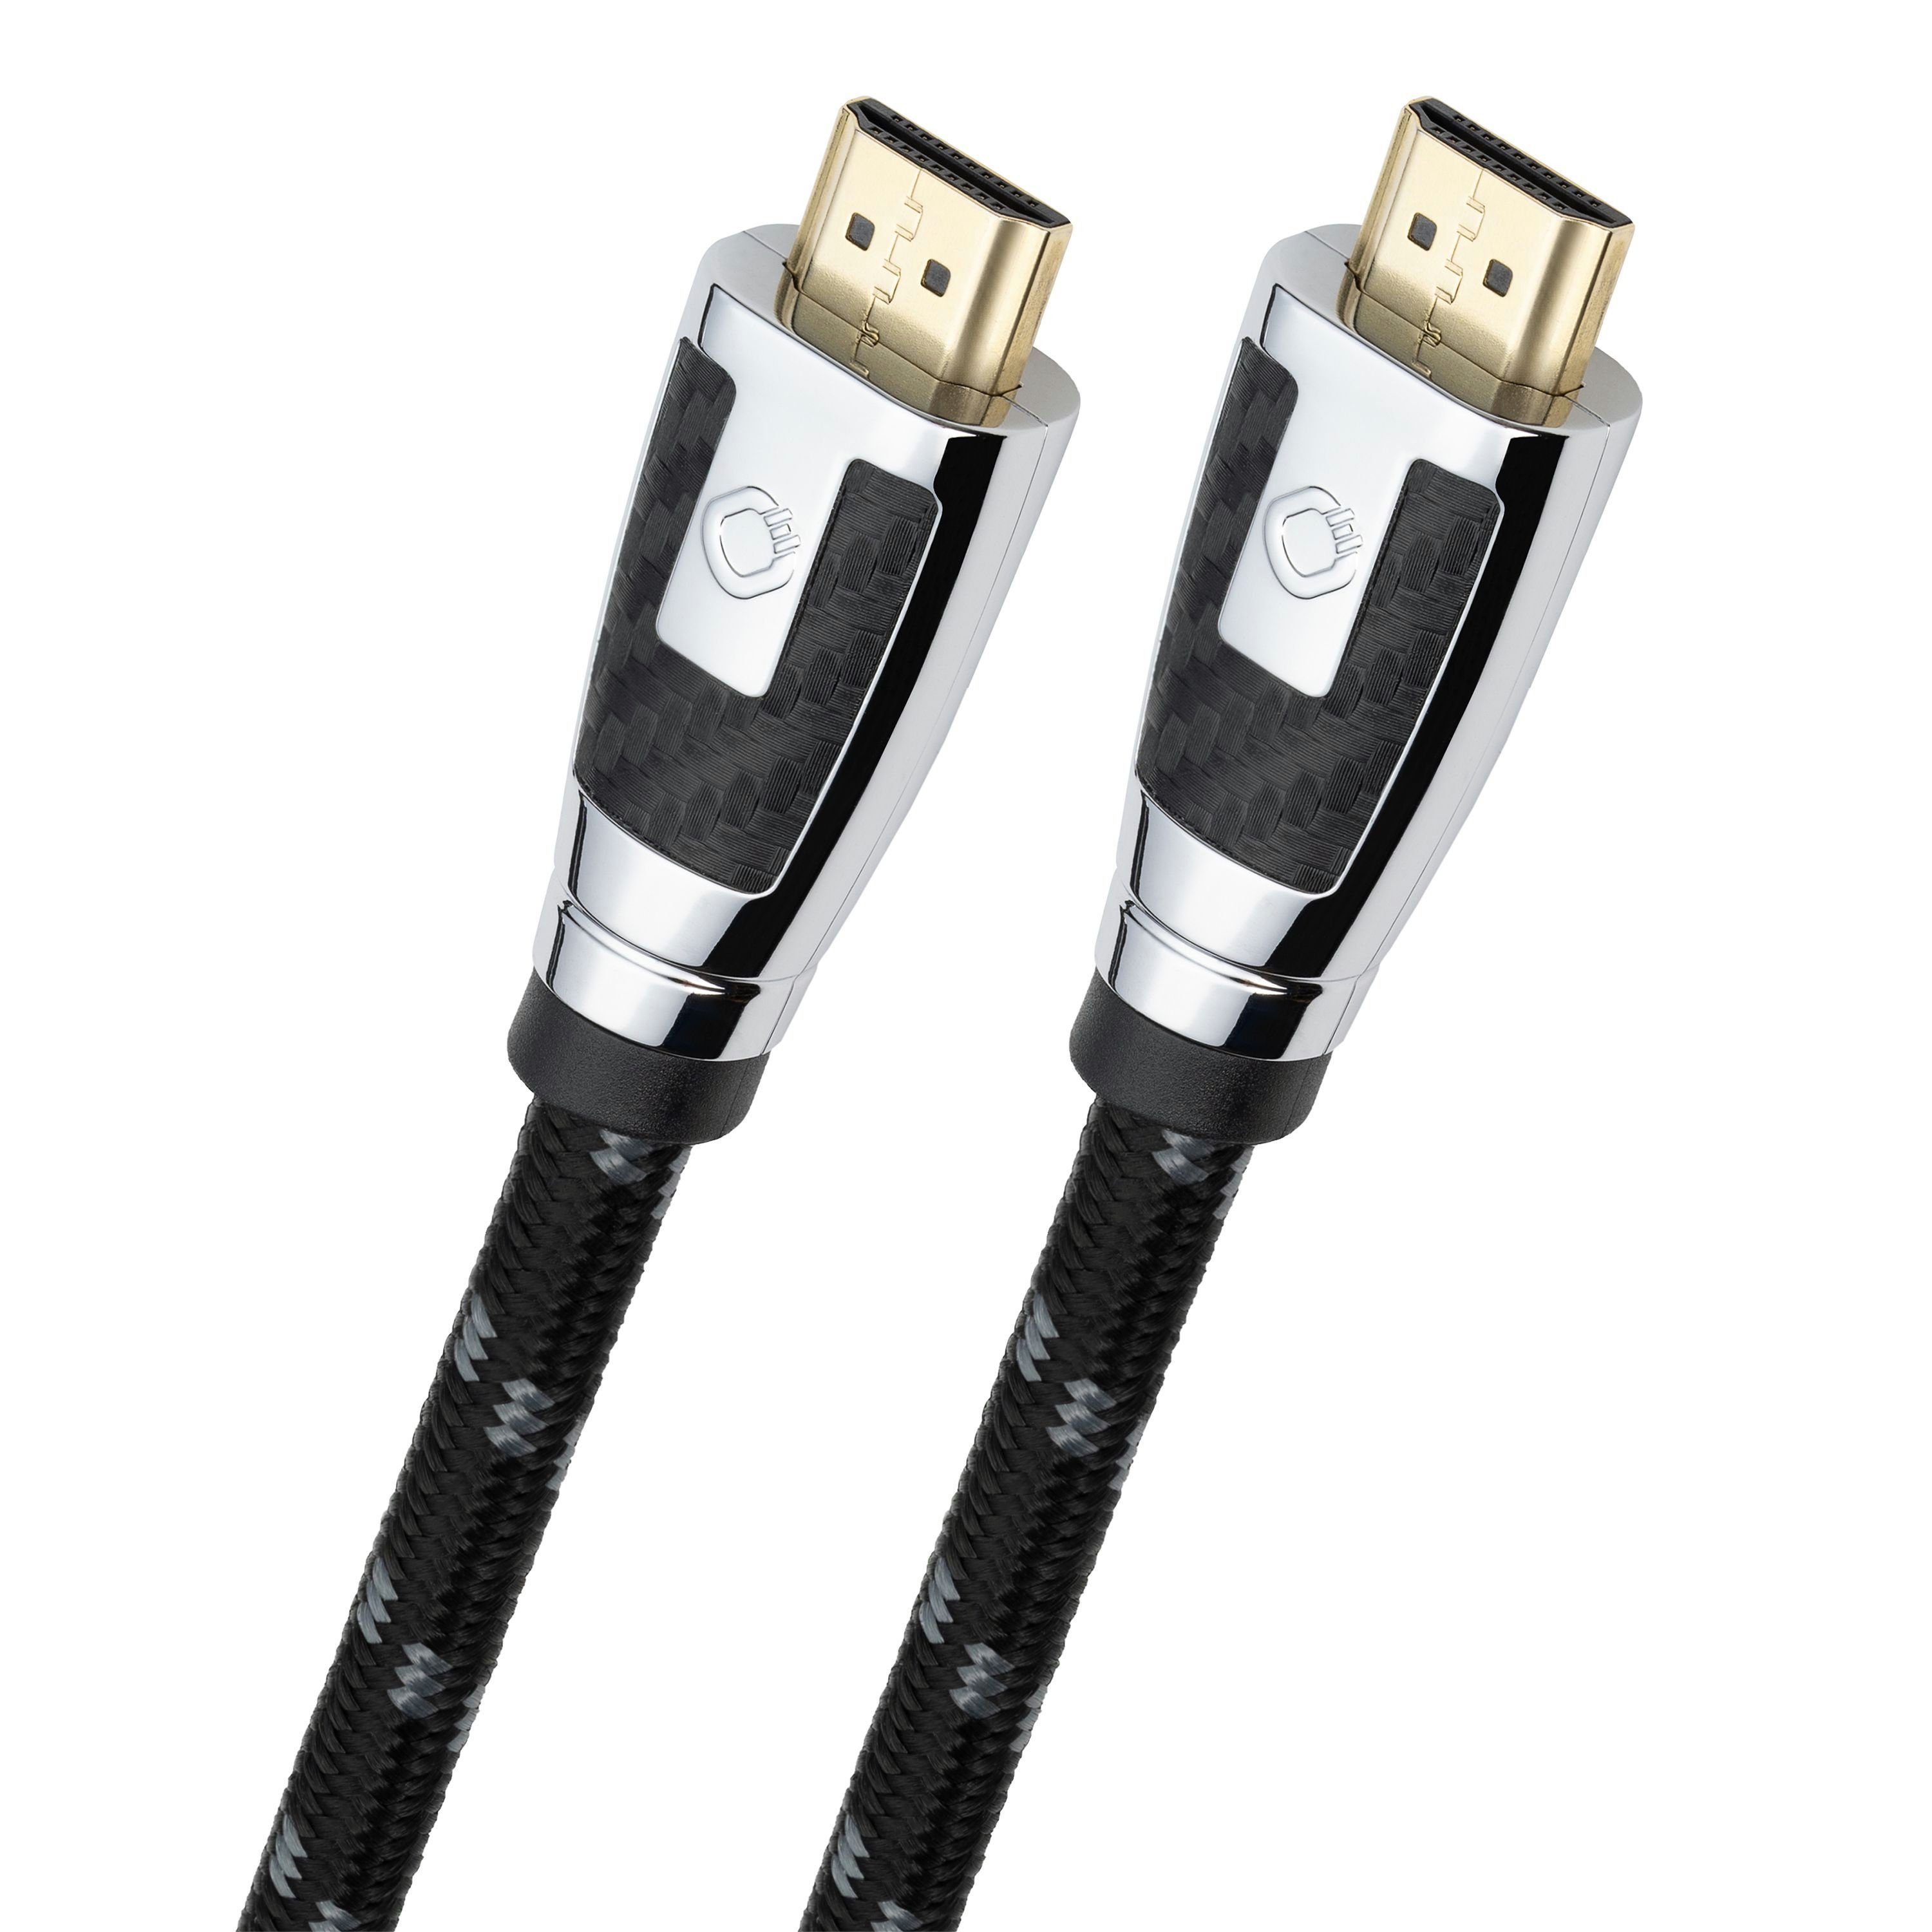 Oehlbach »Carb Connect MKII - High Speed Ethernet HDMI Kabel - 4k Ultra HD  60Hz, 2160p - 21:9 CINEMA, 3D, HDR - HPOCC - 7,5m« HDMI-Kabel, (750 cm)  online kaufen | OTTO